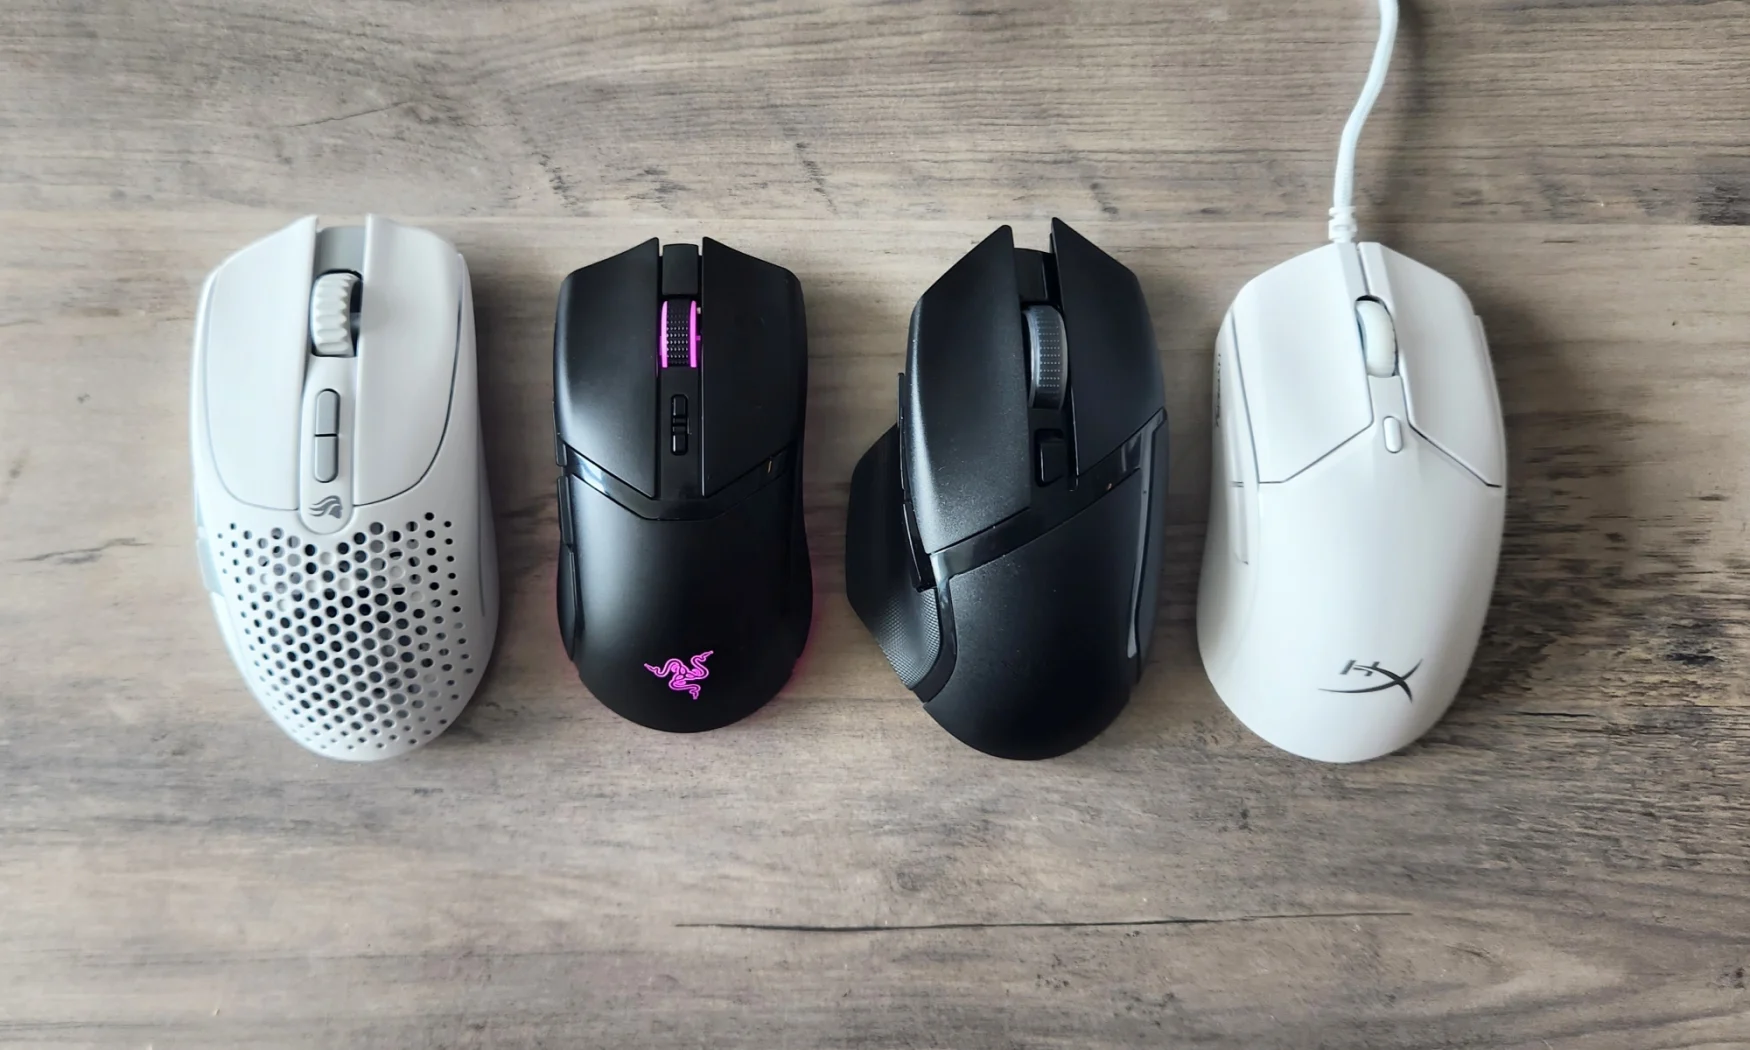 A few of the gaming mice we tested for our latest update. Left to right: the Glorious Model I 2 Wireless, the Razer Cobra Pro, the Razer Basilisk V3 X HyperSpeed and the HyperX Pulsefire Haste 2.